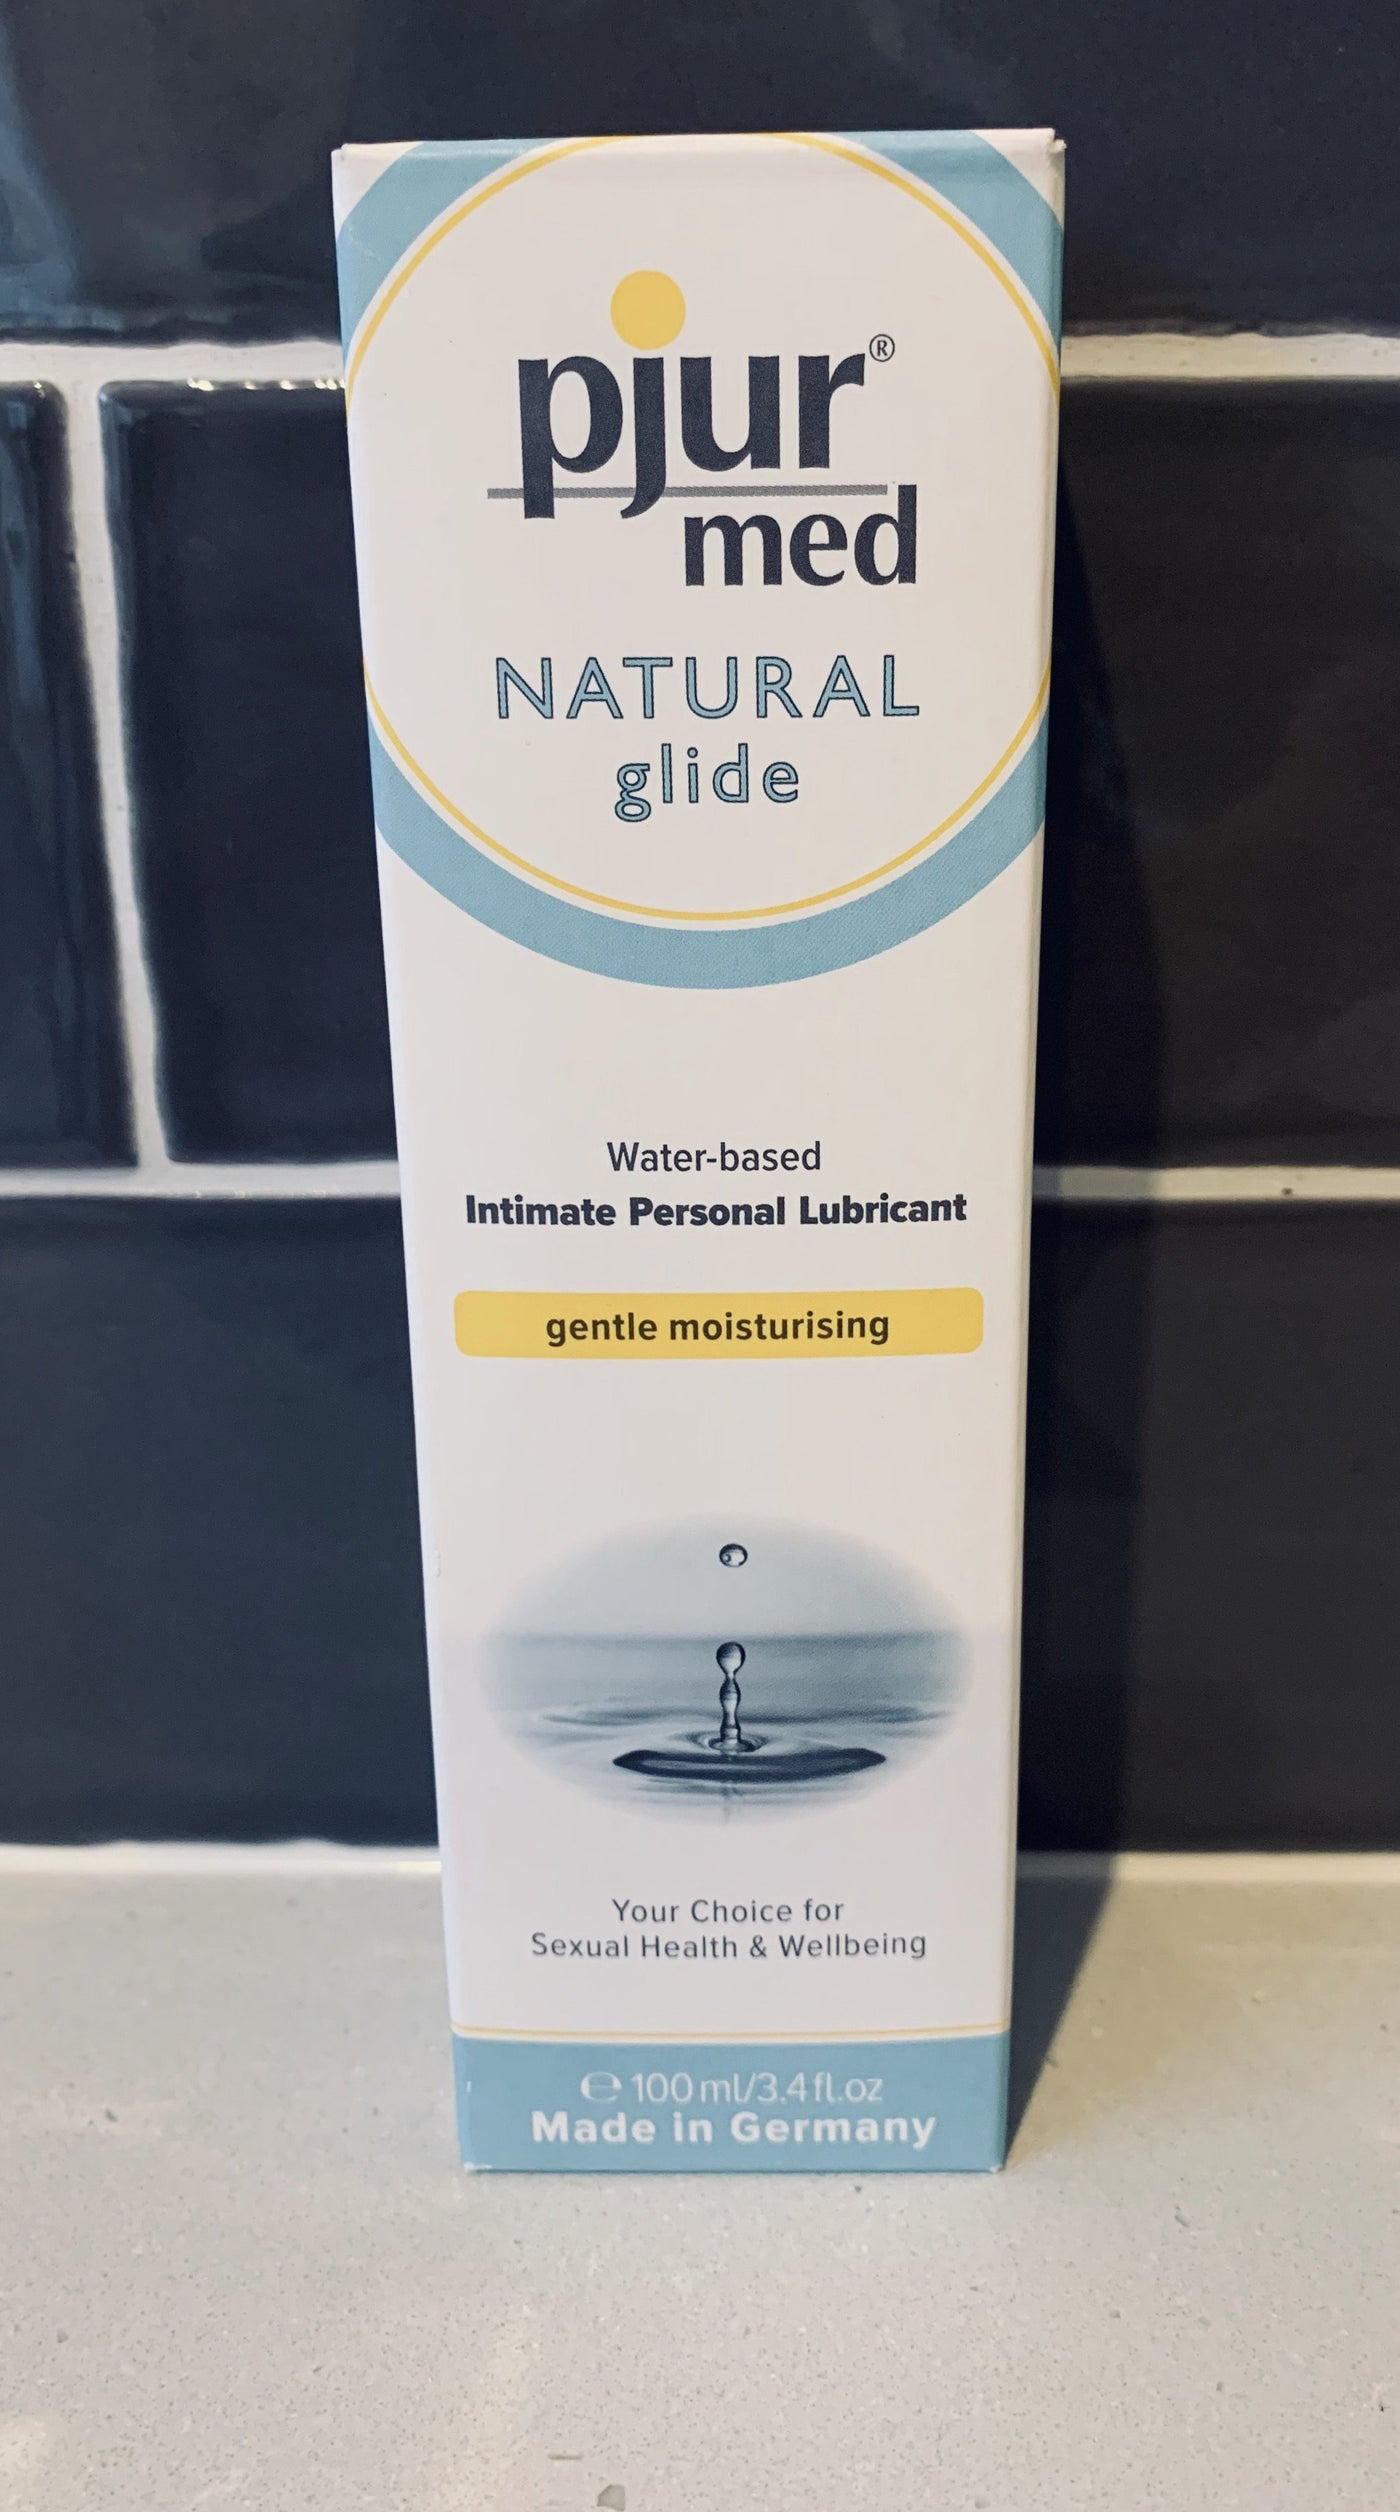 pjur®med NATURAL glide Intimate Personal Lubricant 100mL